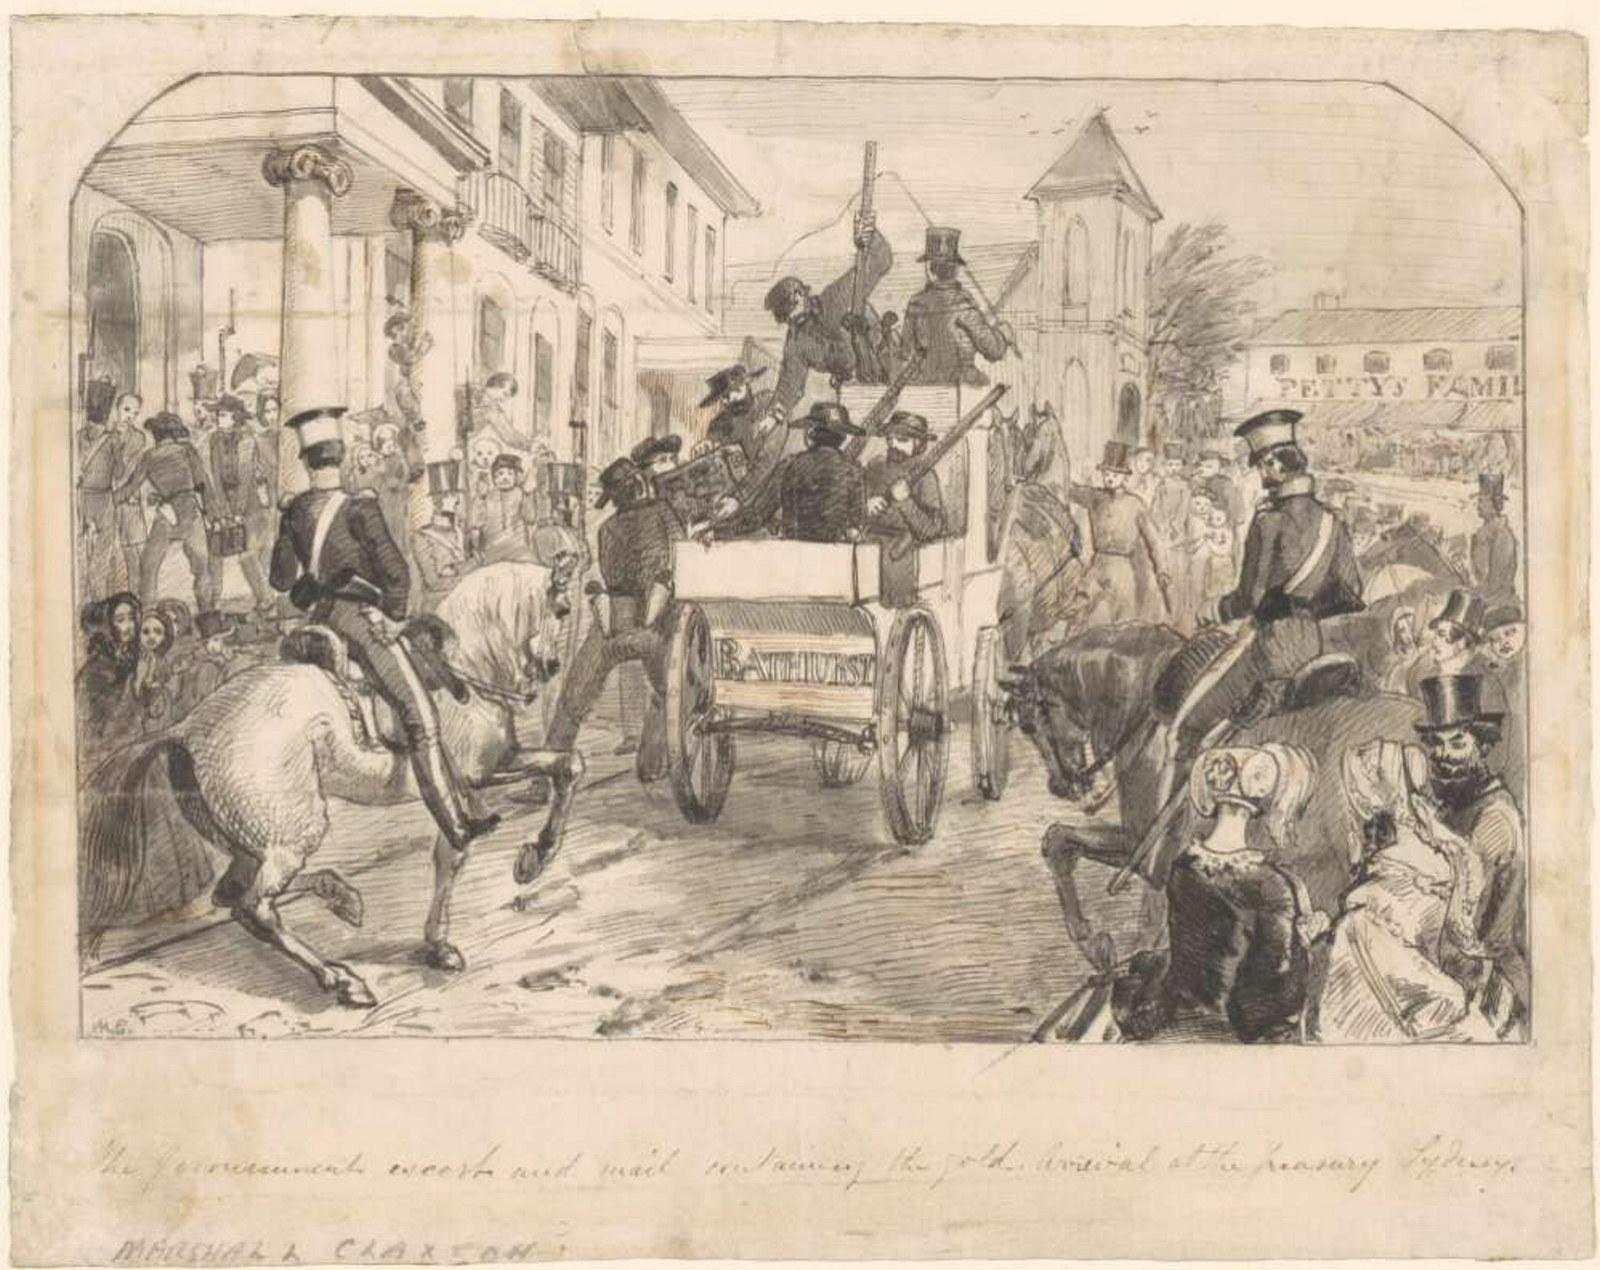 Artwork showing arrival of gold escort to Sydney in 1851